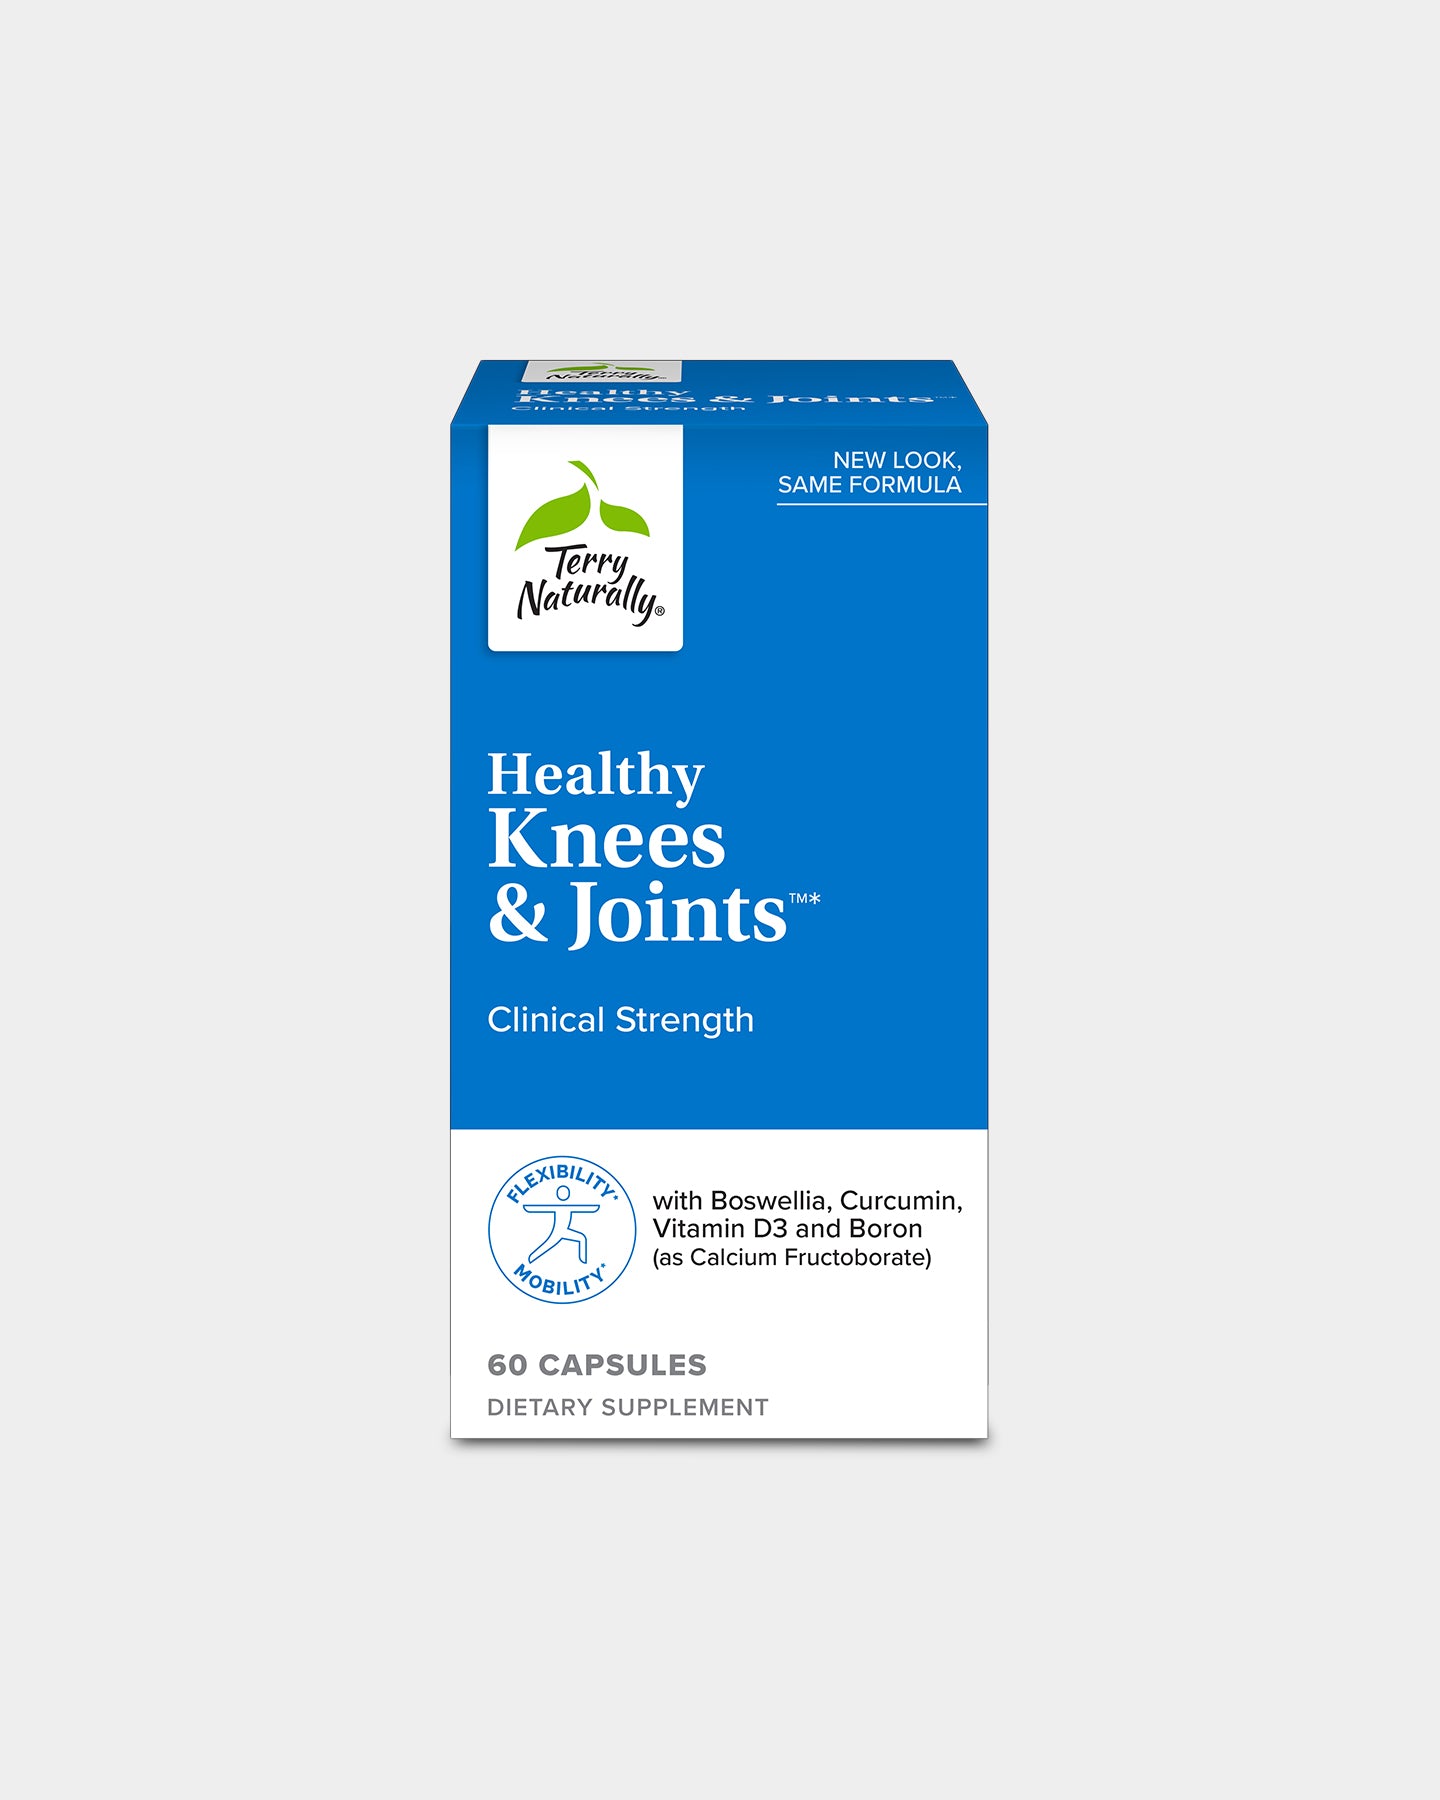 Terry Naturally Healthy Knees & Joints A1